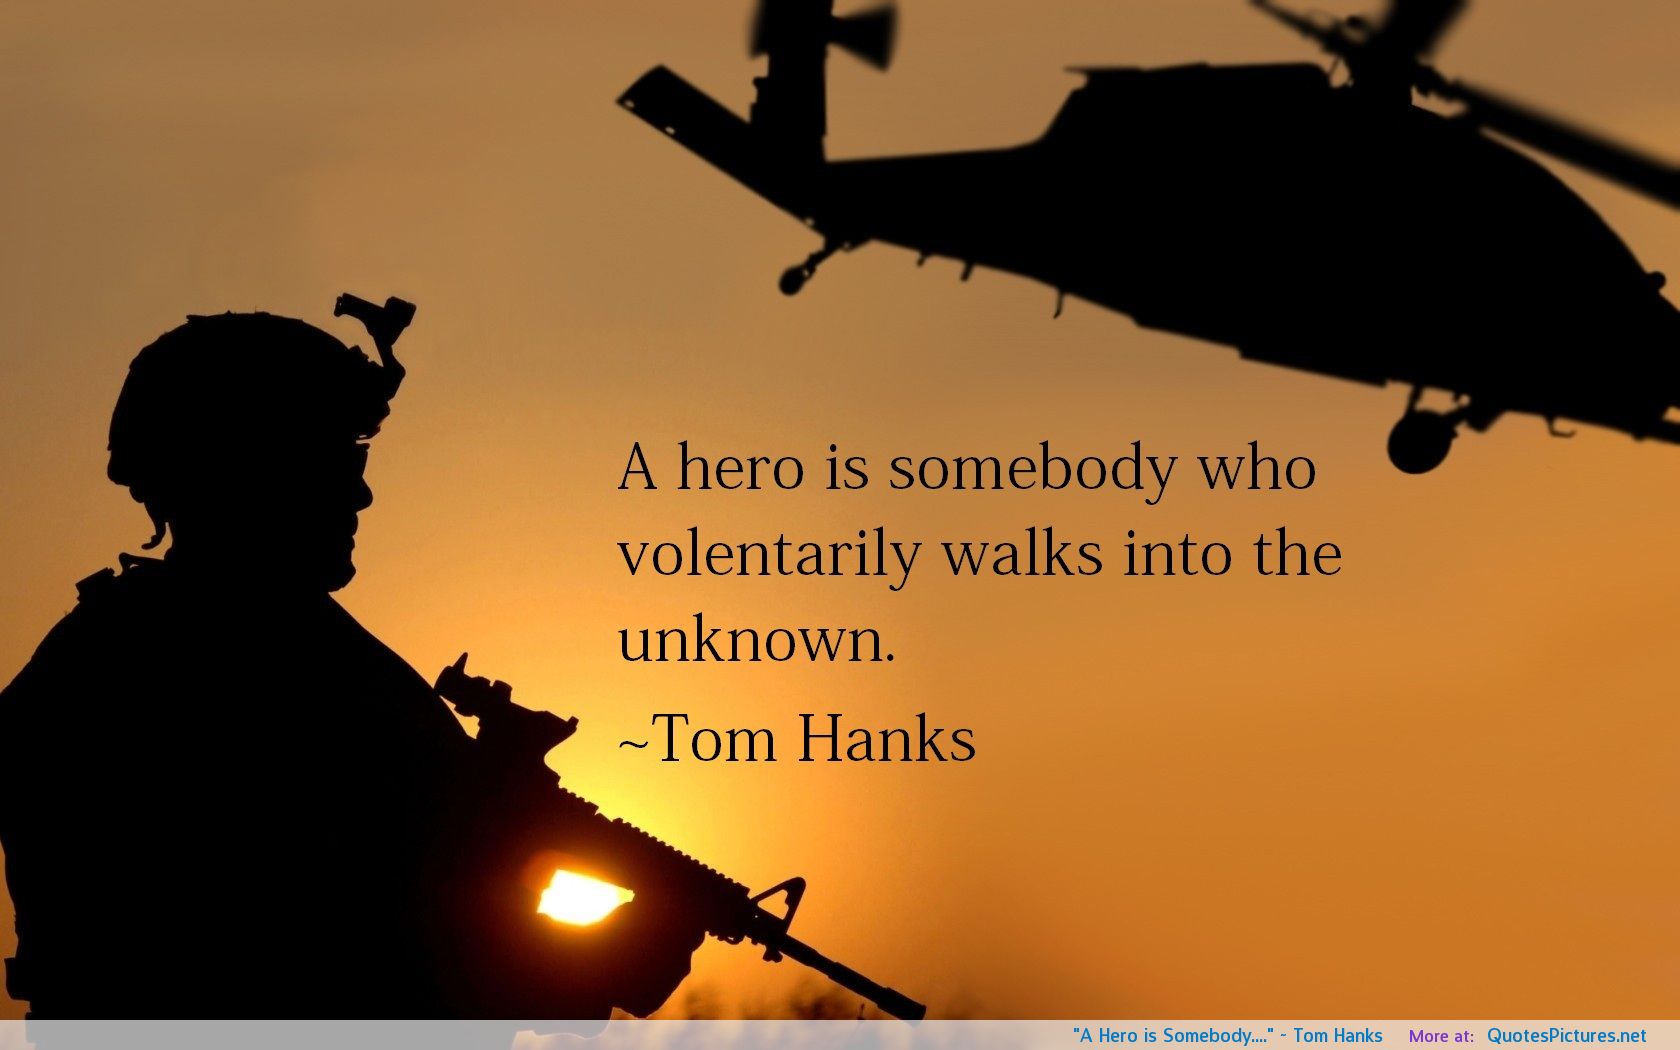 A hero is somebody who voluntarily walks into the unknown. Tom Hanks